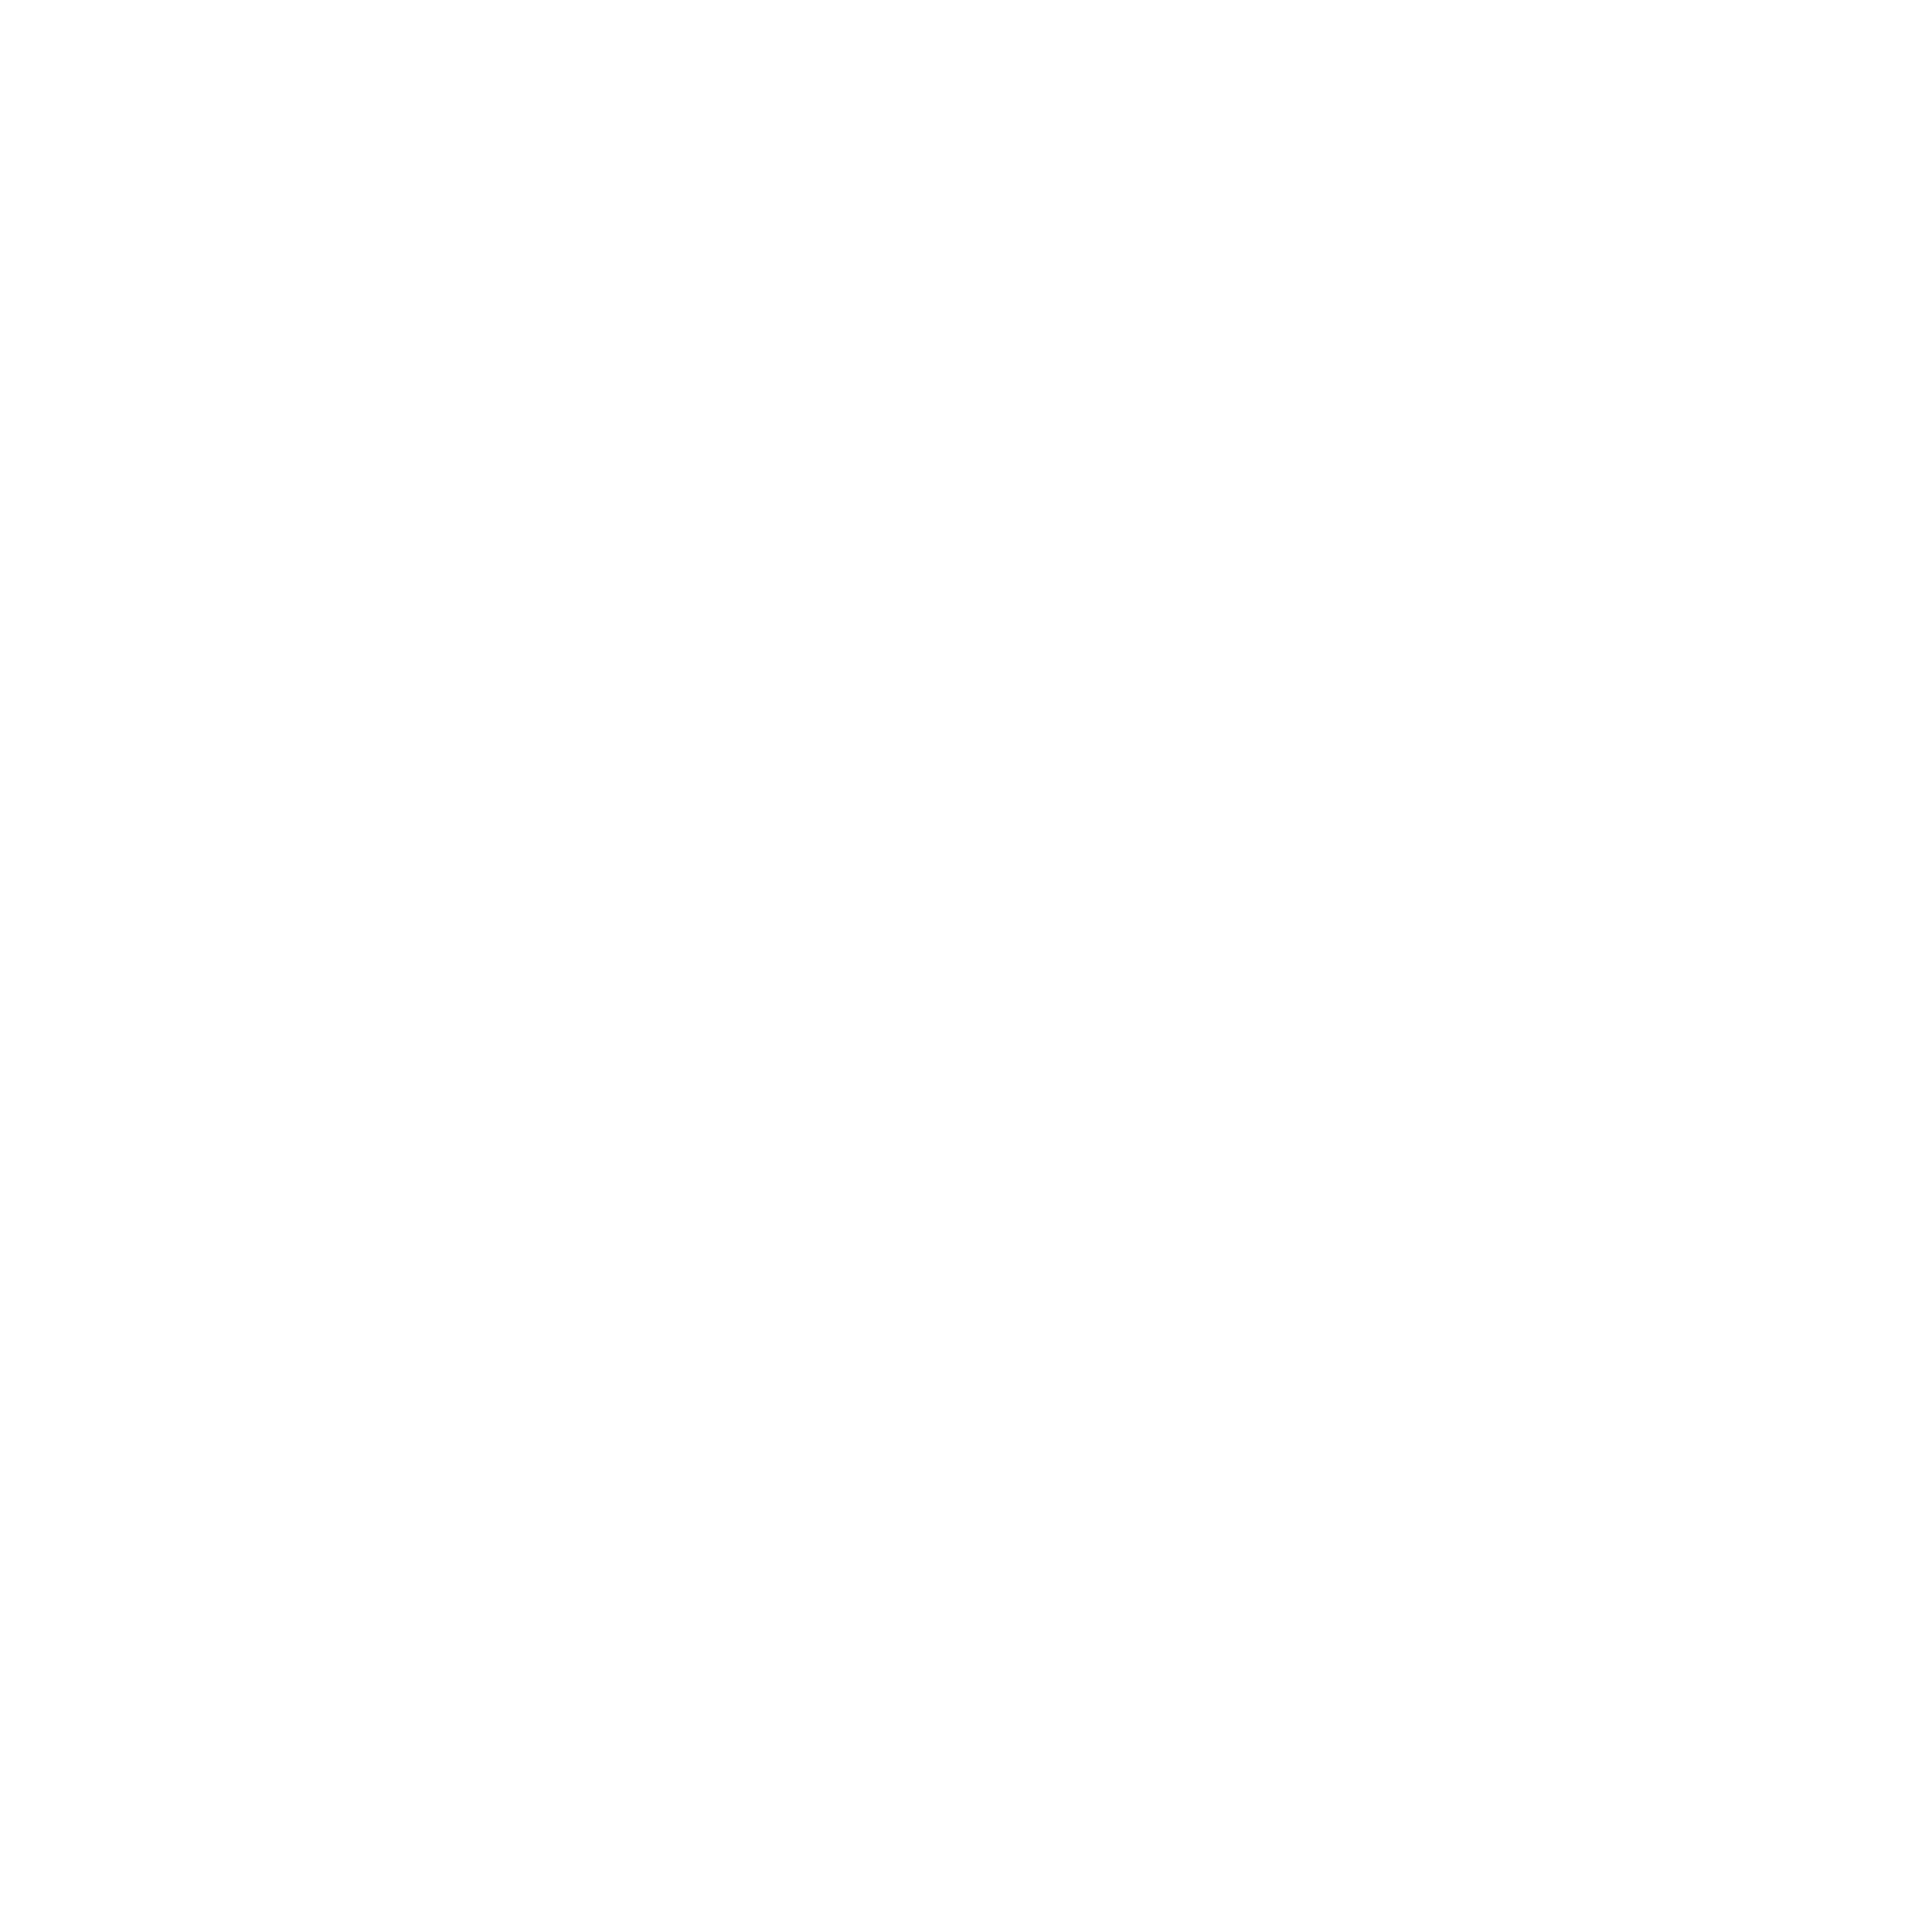 Shift Cryptocurrency icon